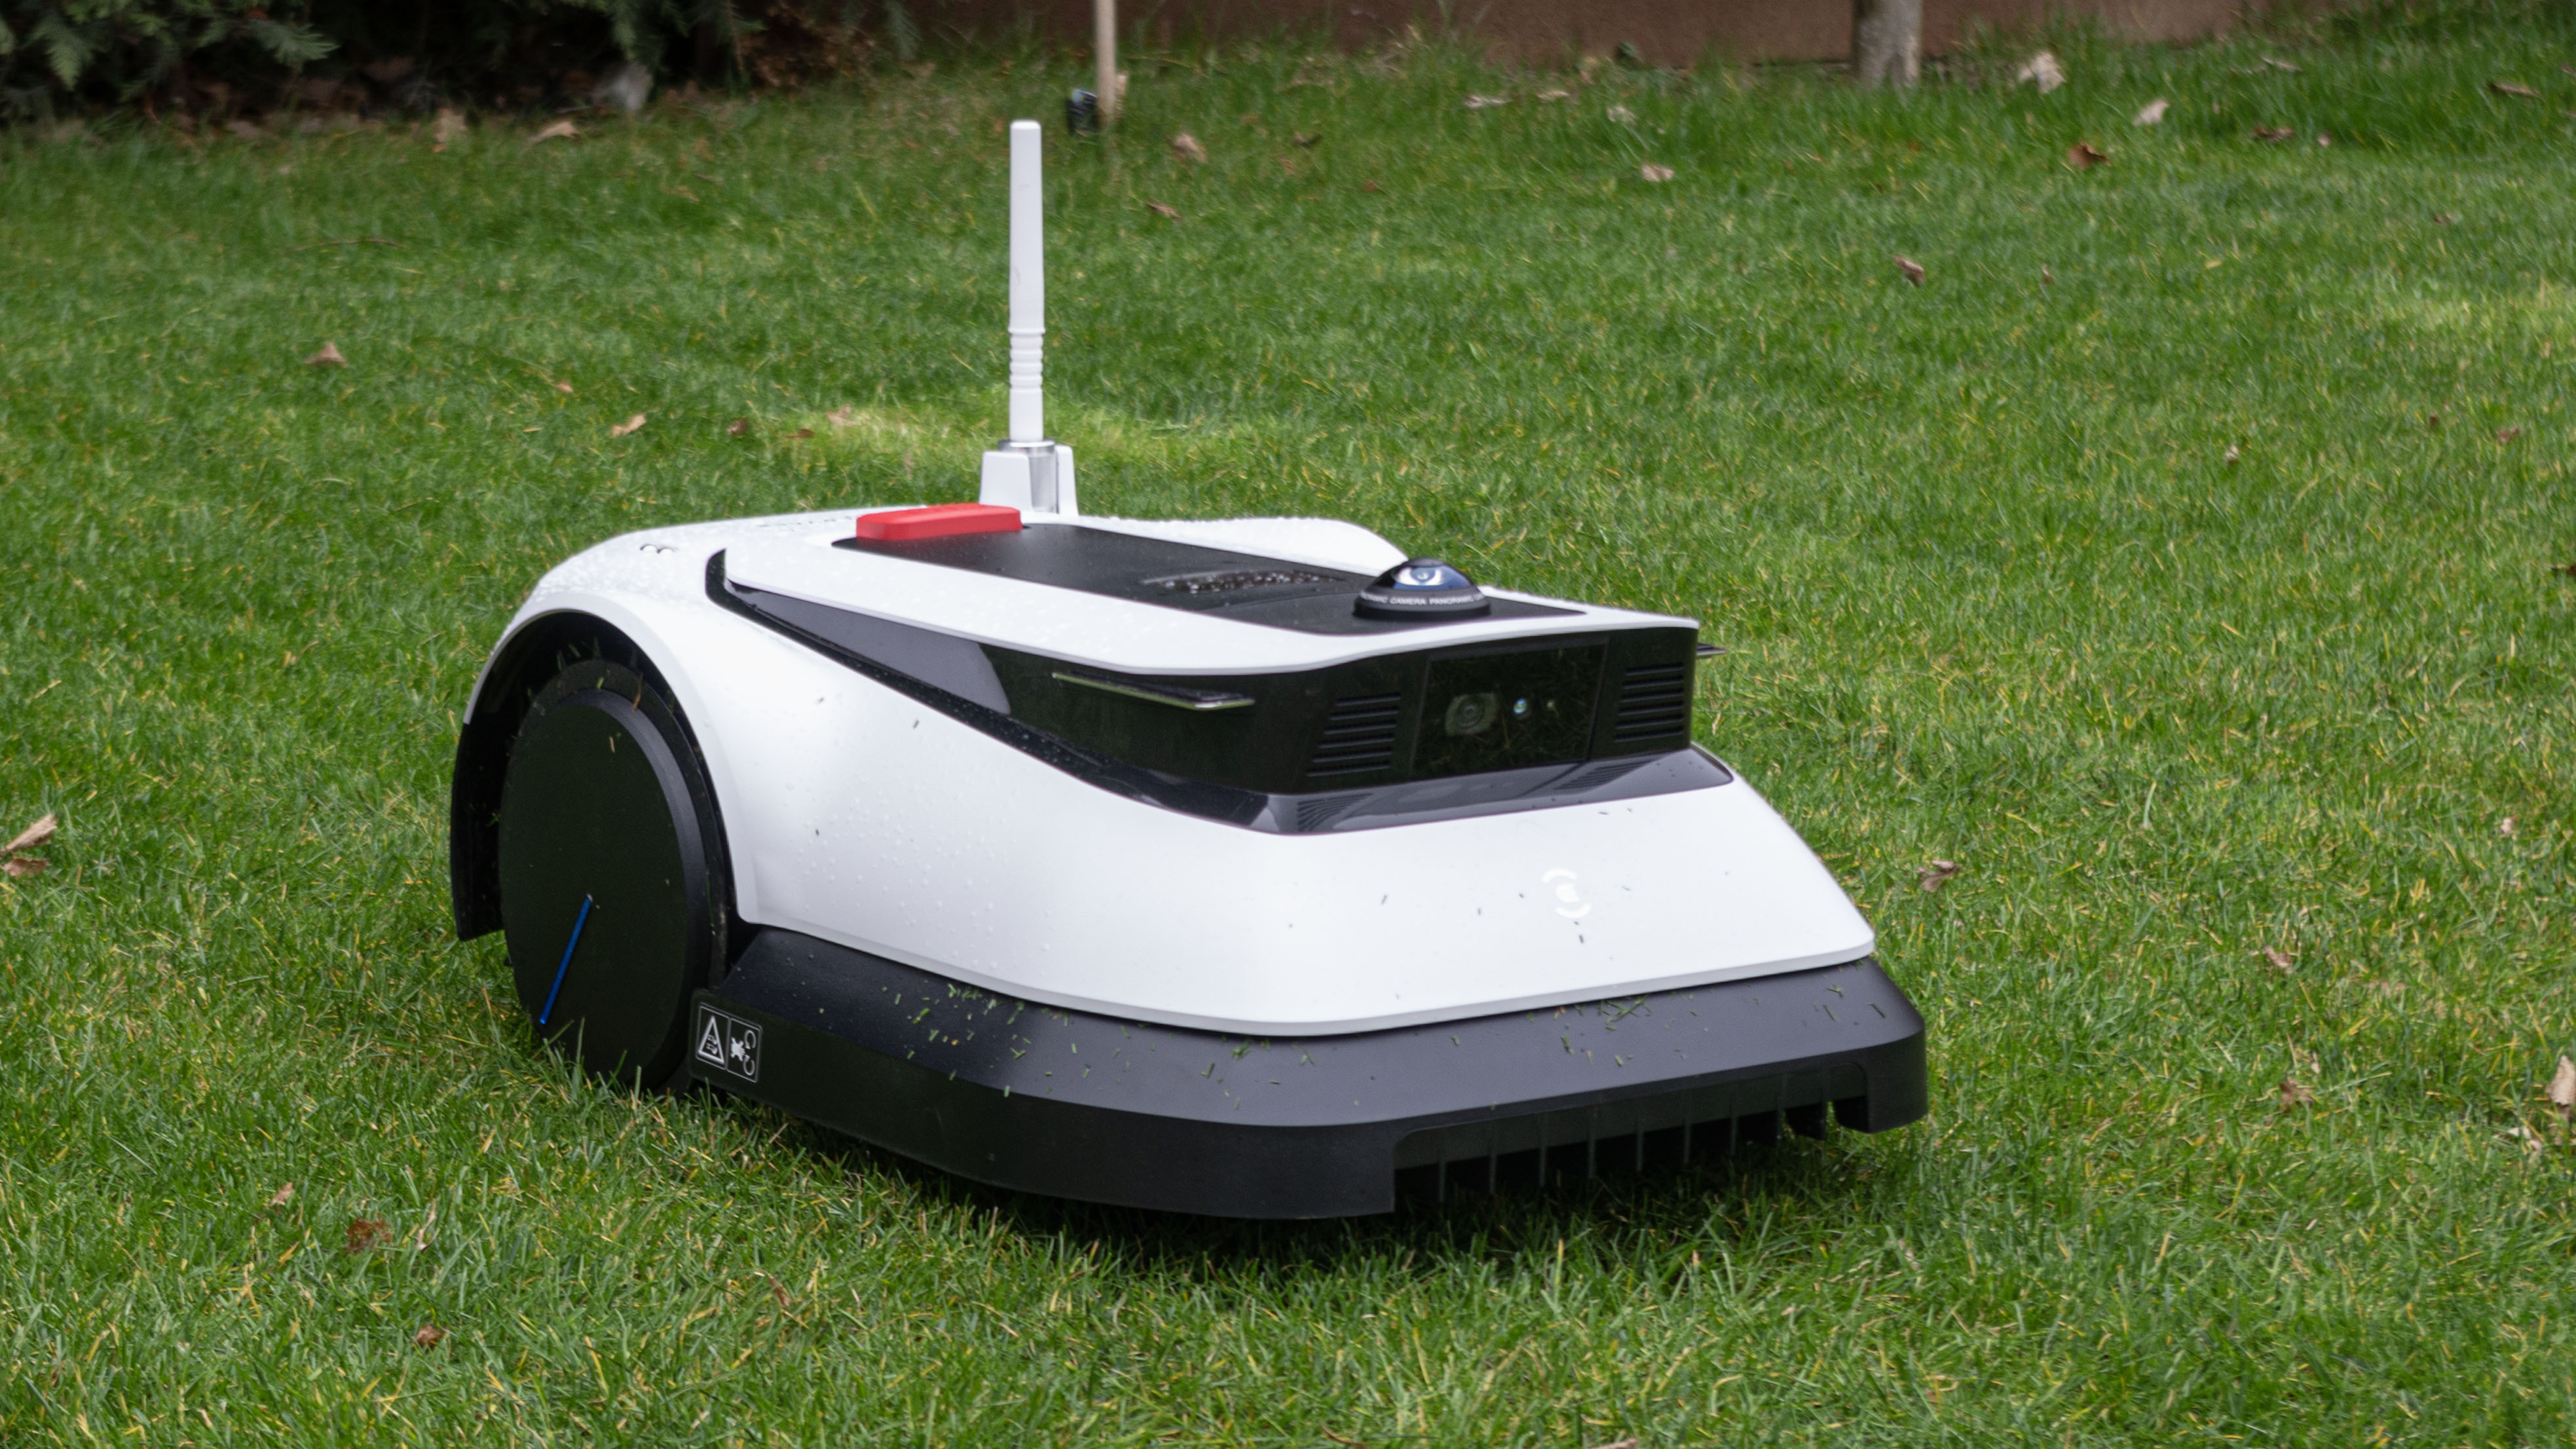 Worx Landroid Vision Review - Game-changing wire-free robot lawn